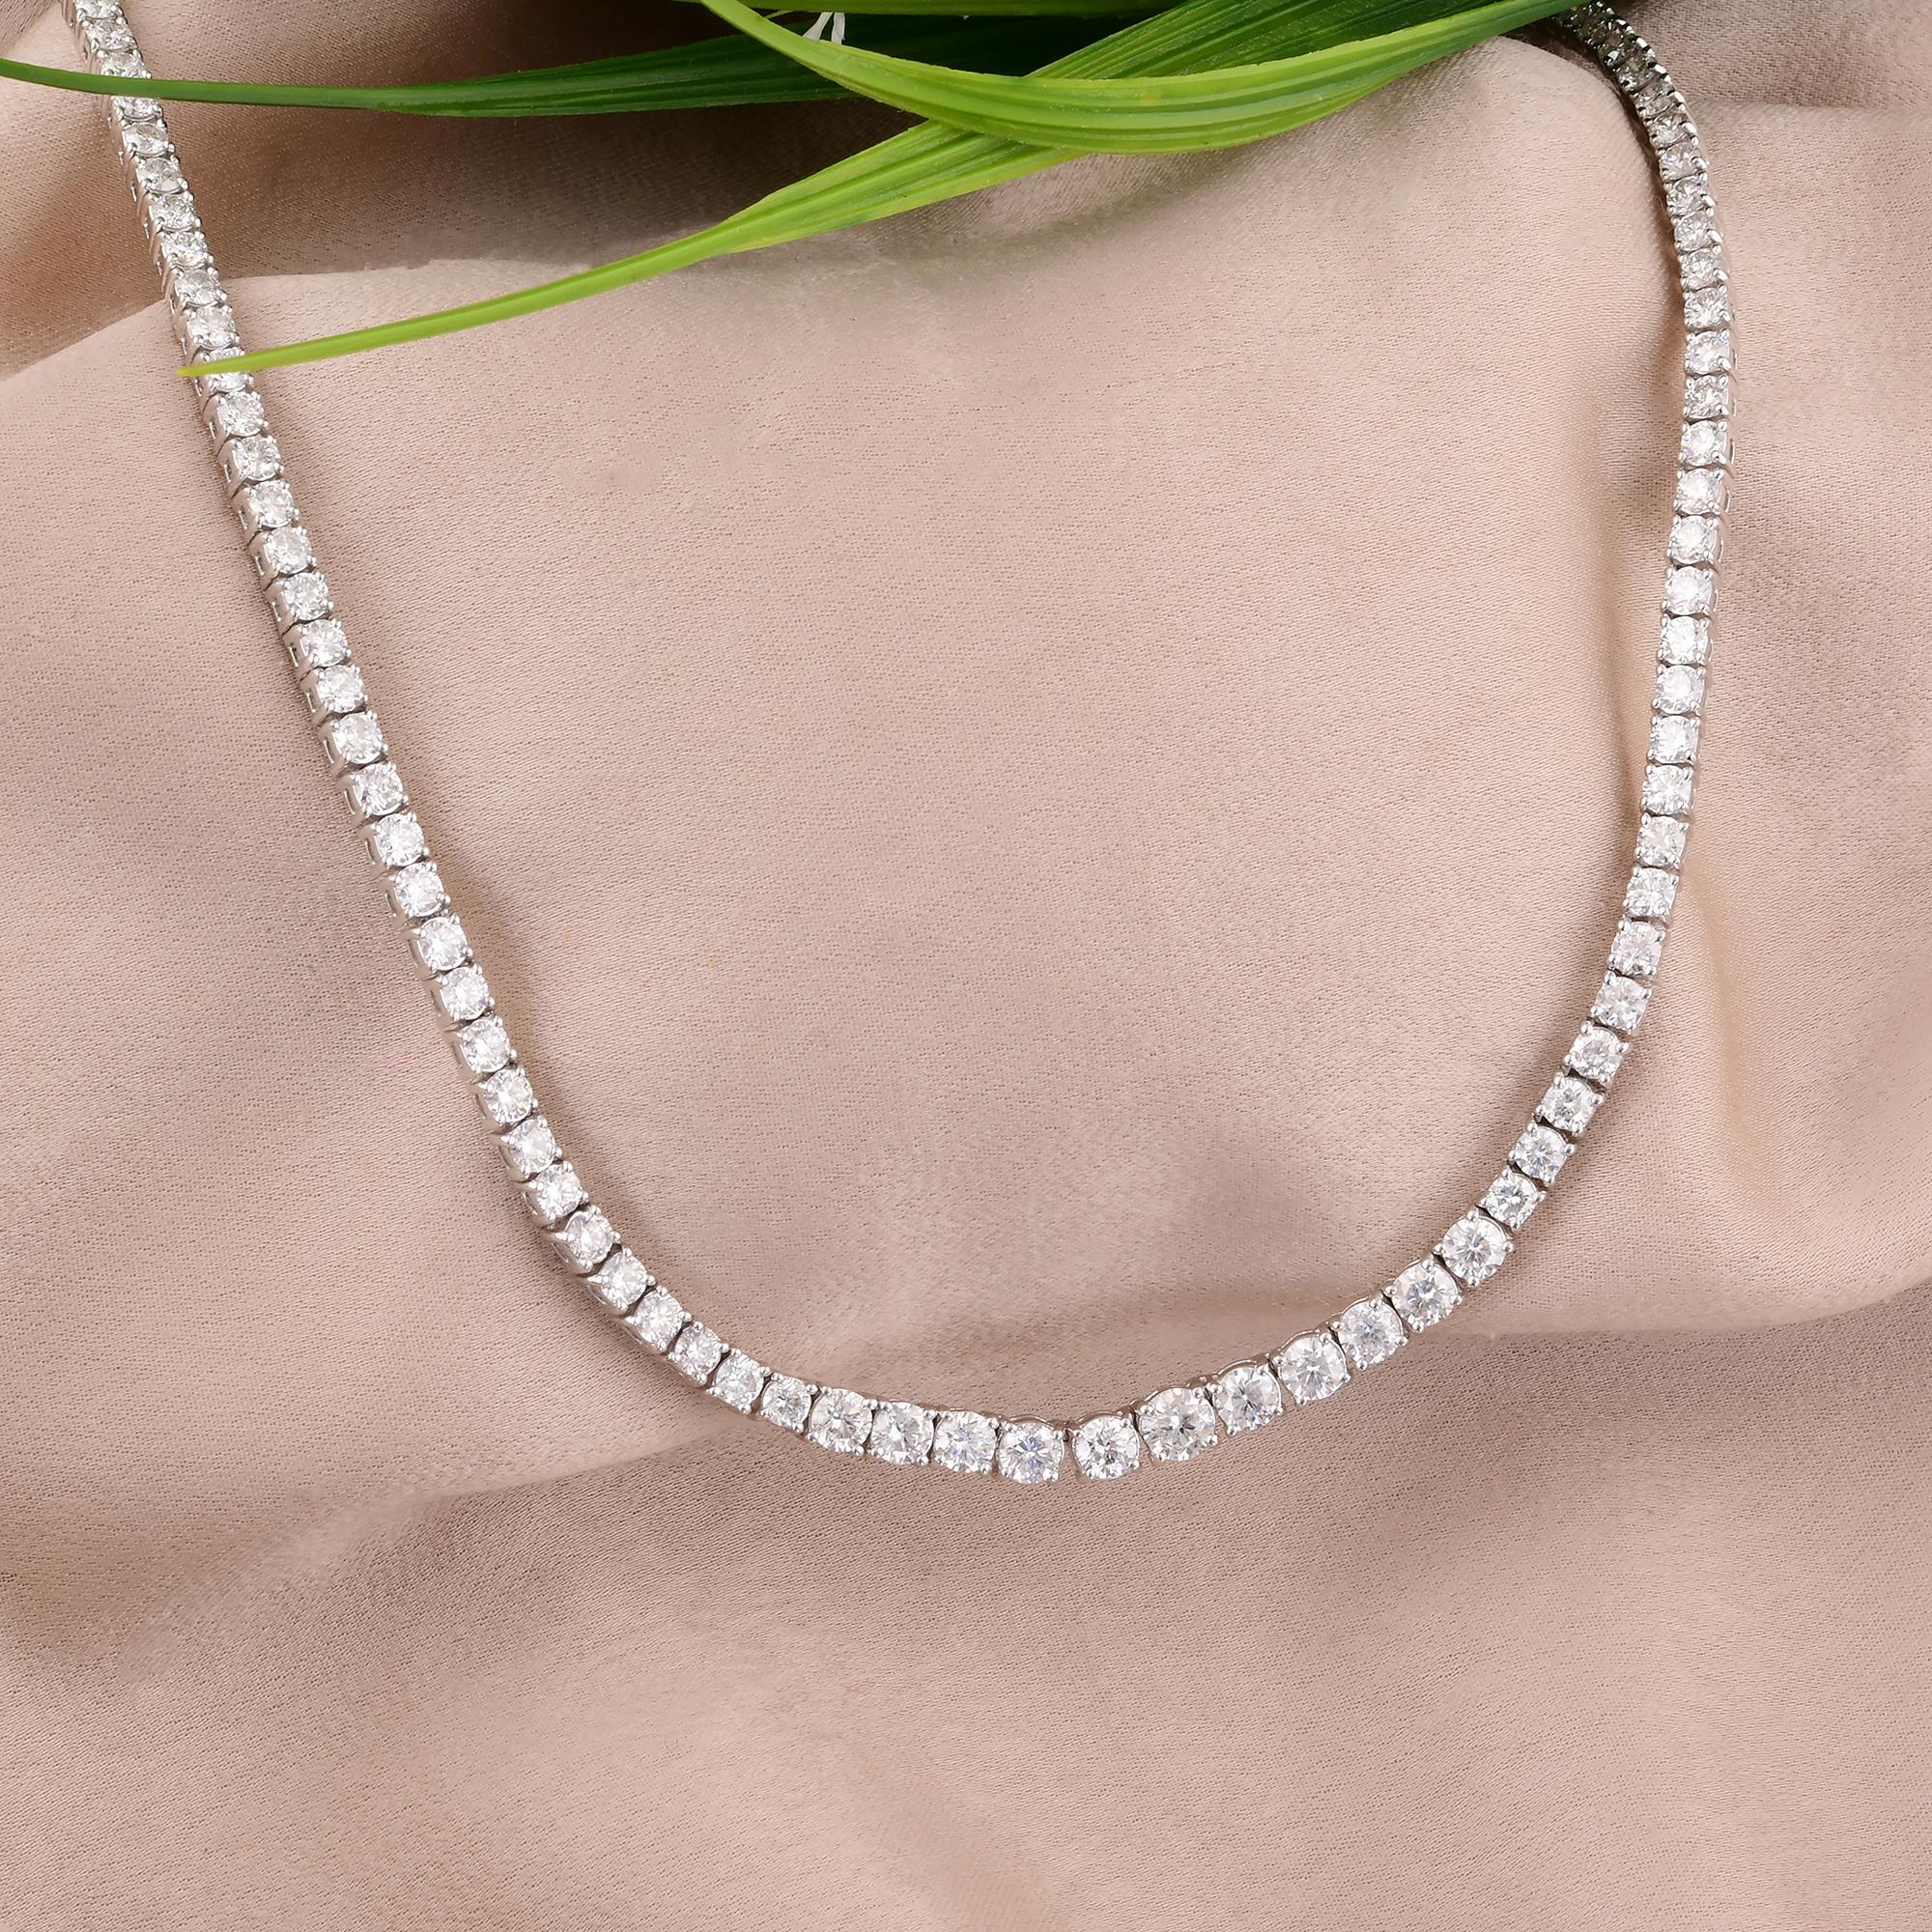 Expertly set in 14 Karat White Gold, the diamonds are arranged in a classic chain necklace design, showcasing their timeless beauty and elegance. The white gold setting provides the perfect backdrop for the shimmering diamonds, enhancing their